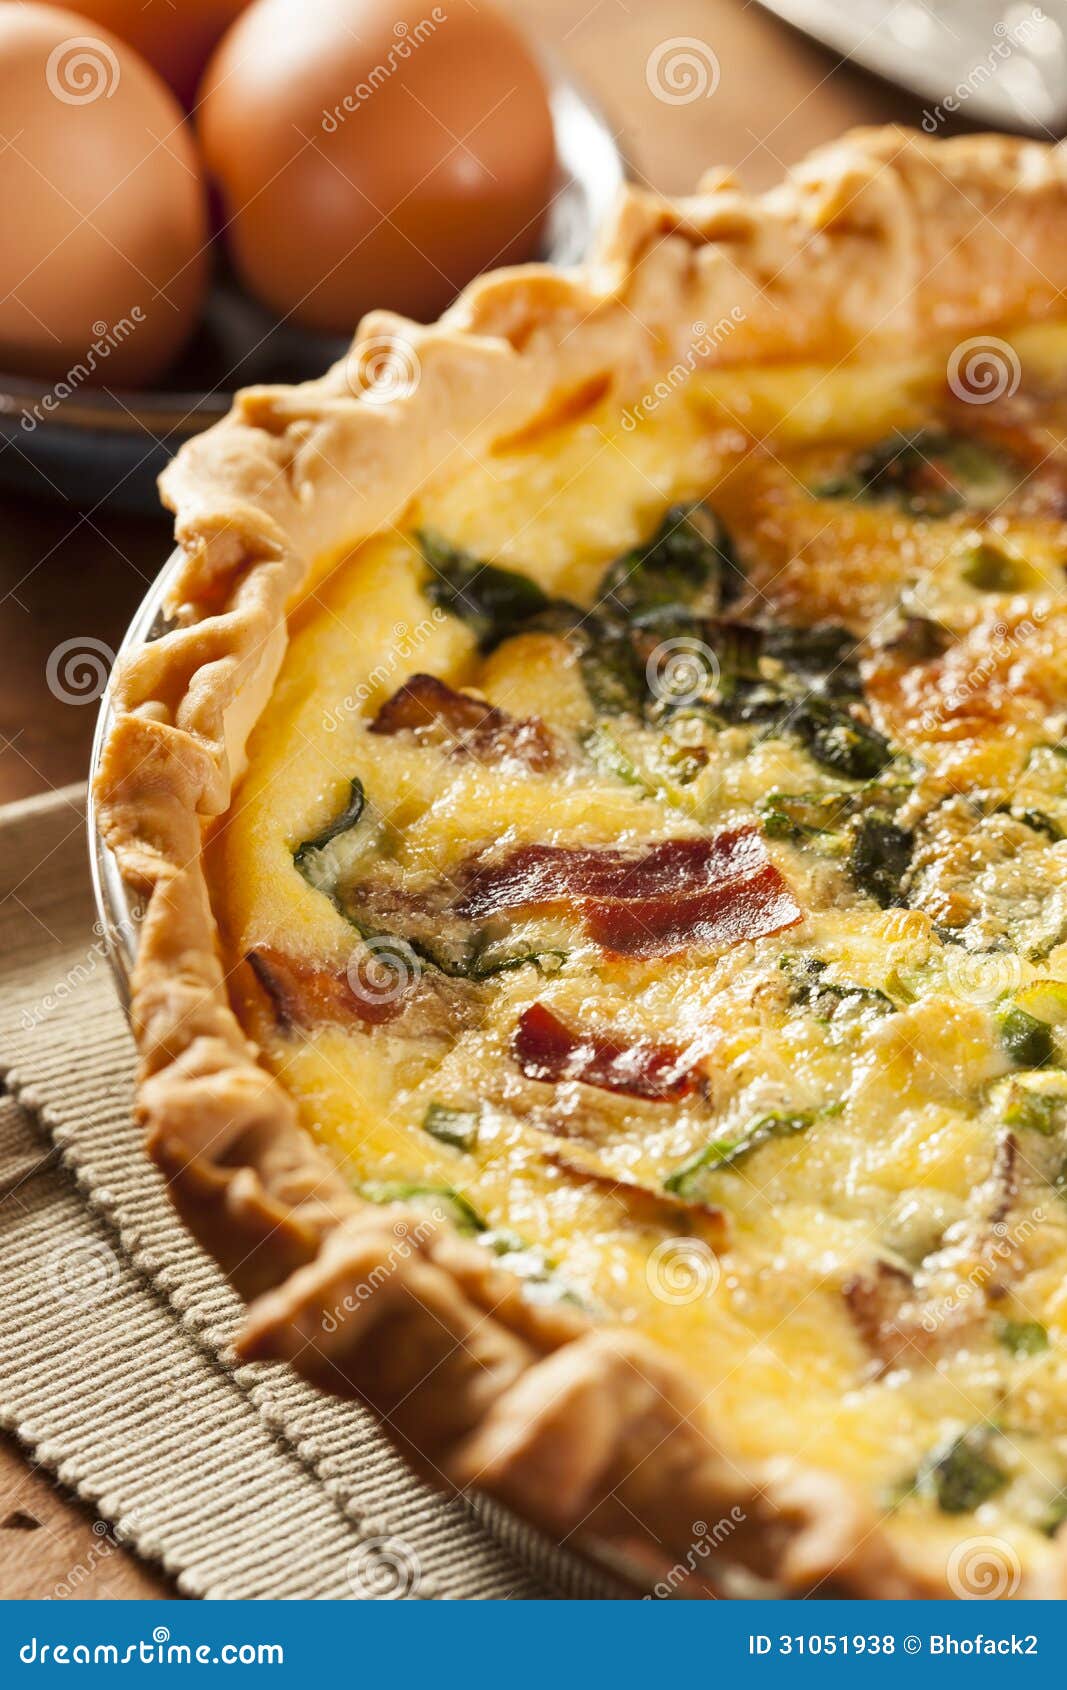 Homemade Spinach and Bacon Egg Quiche Stock Photo - Image of food ...